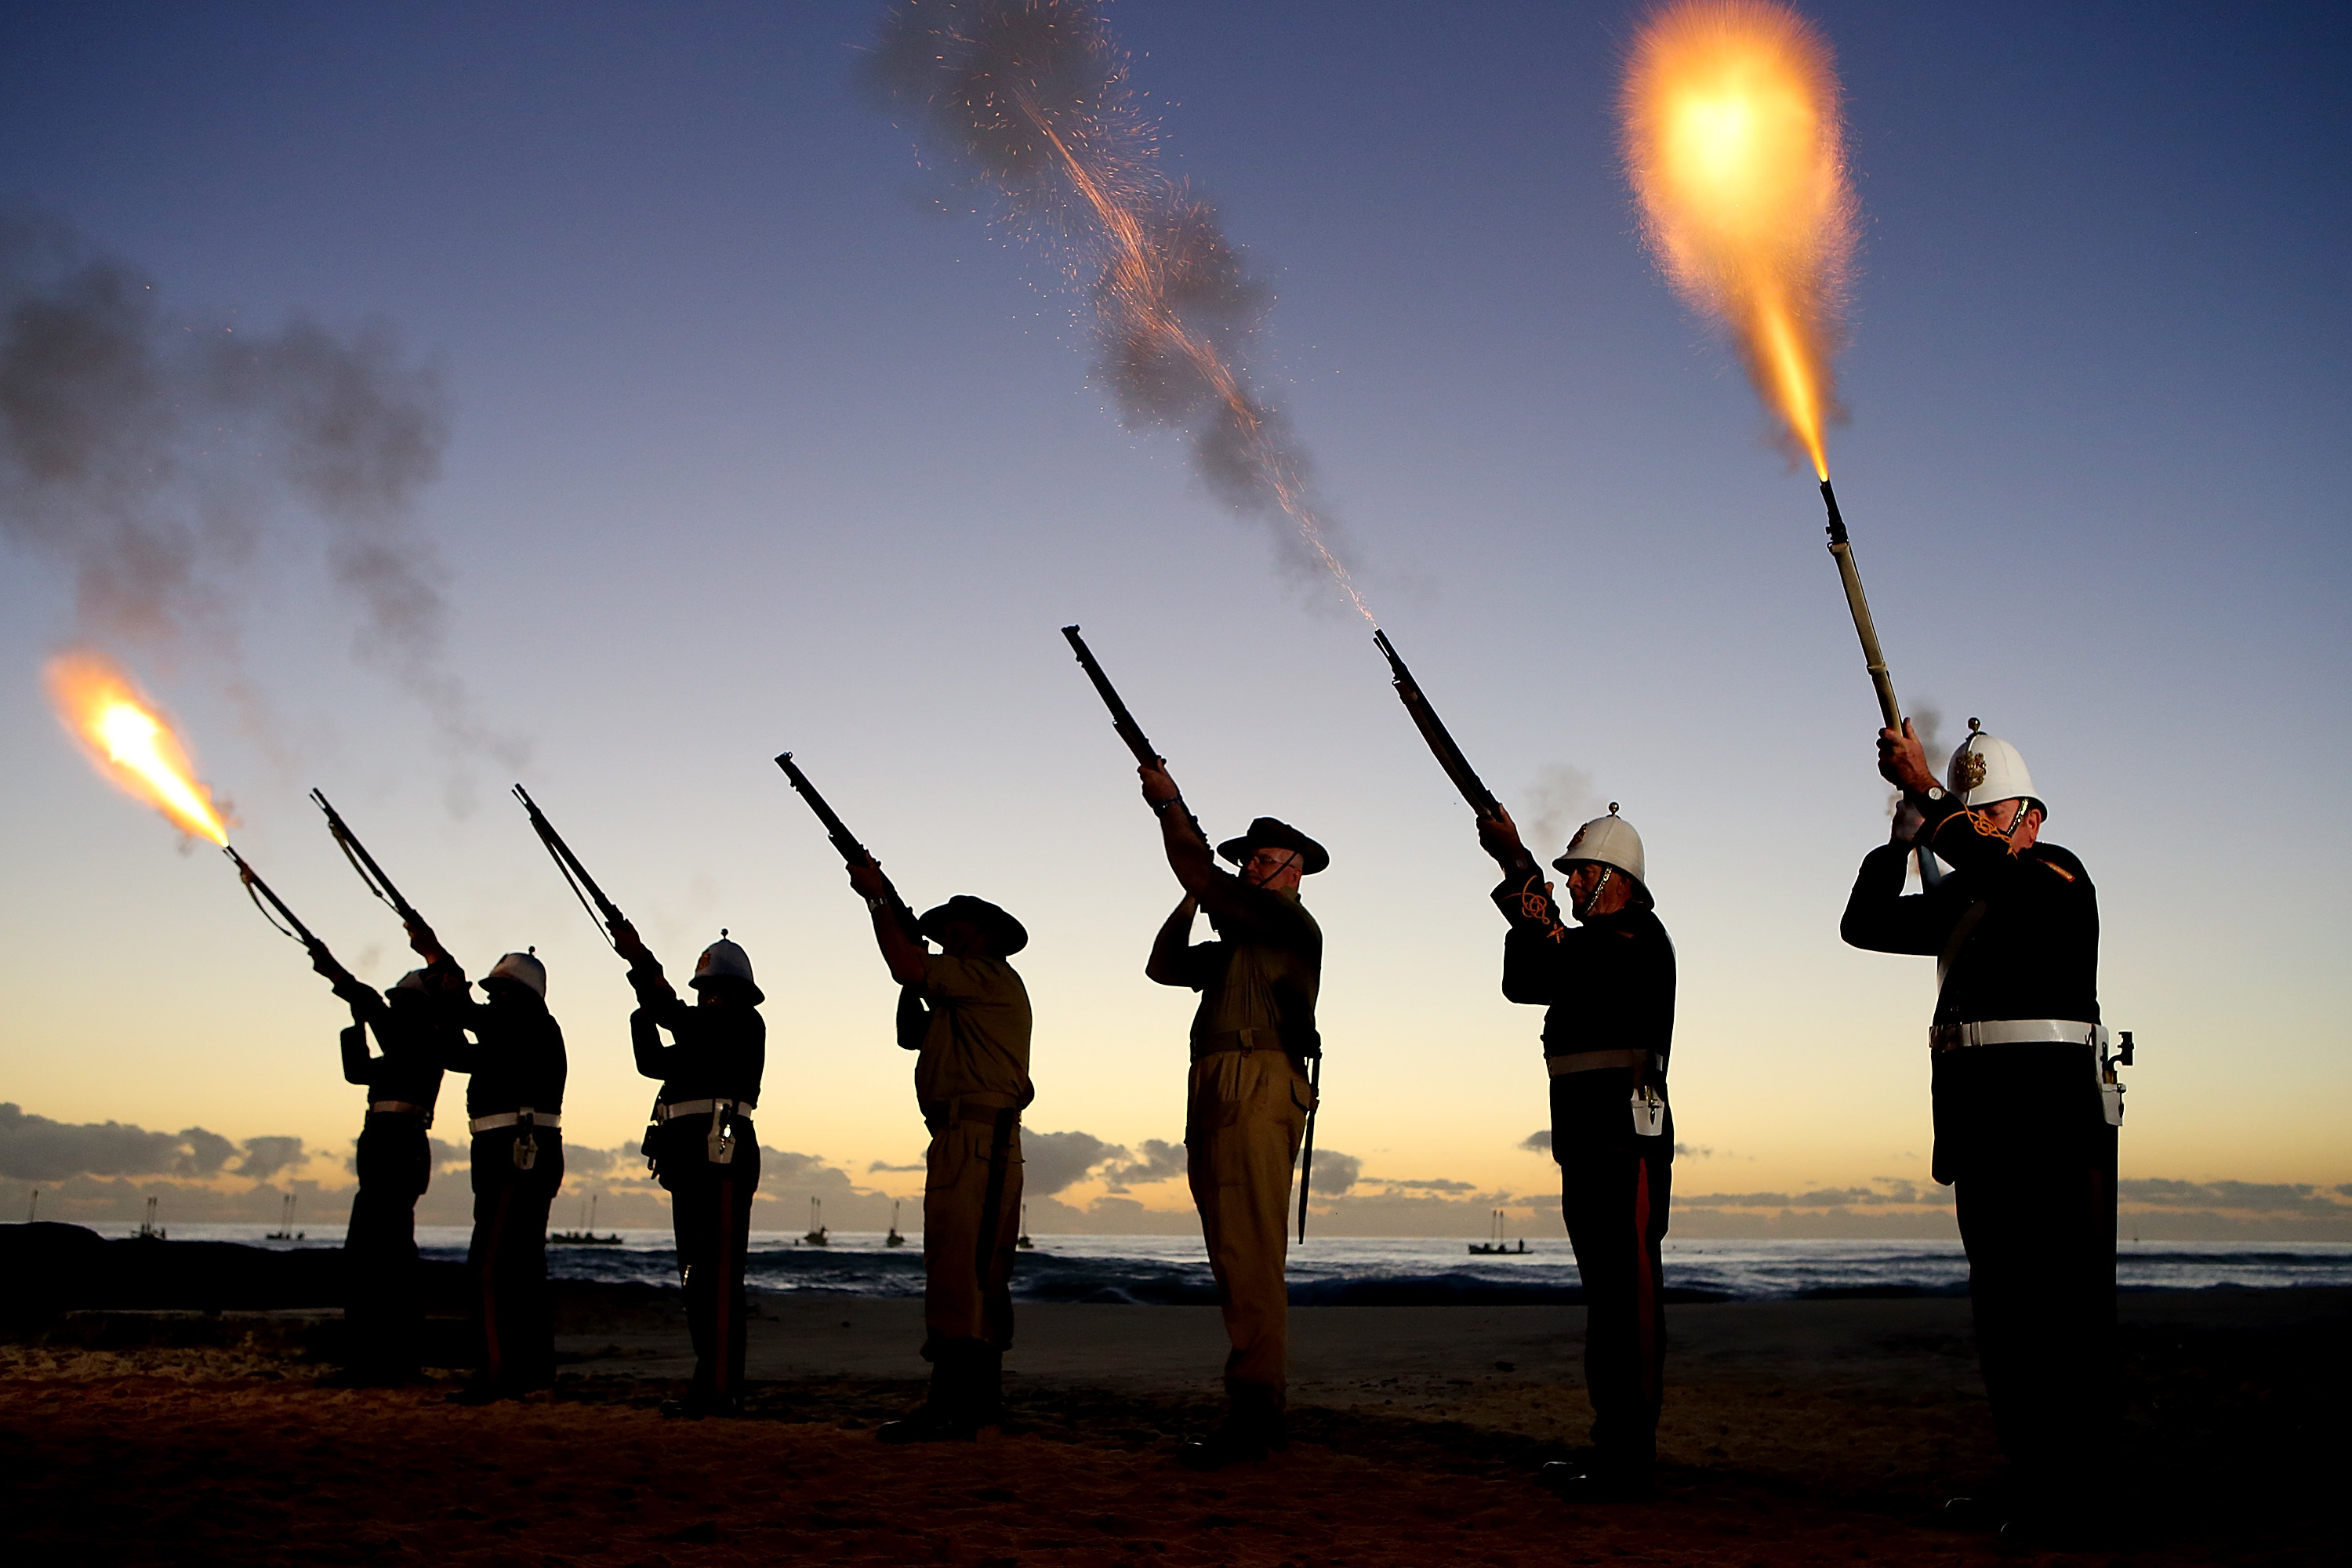 Rifle volley salute